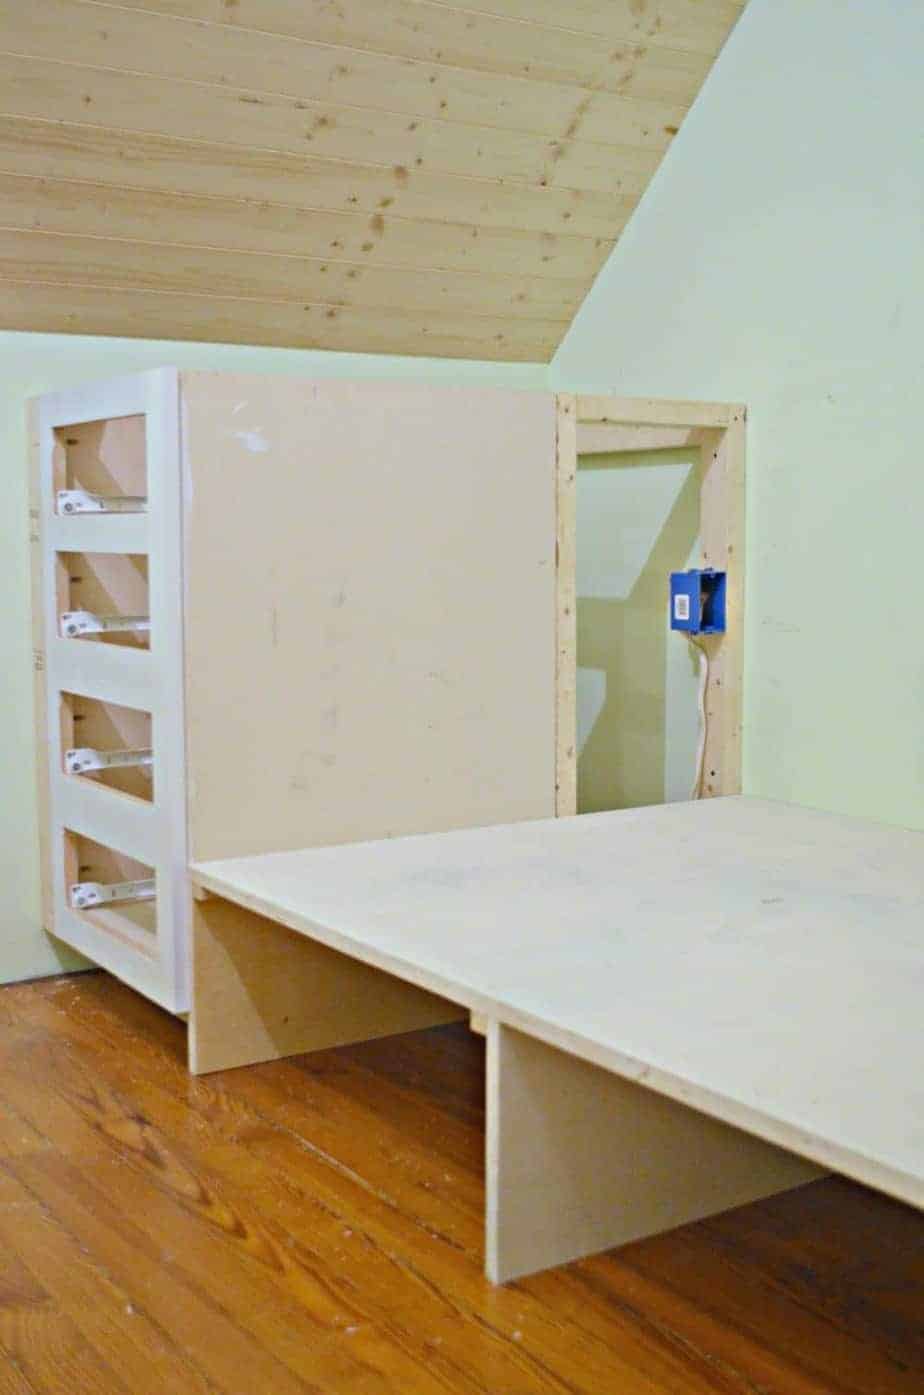 How to make a built-in bed using stock kitchen cabinets